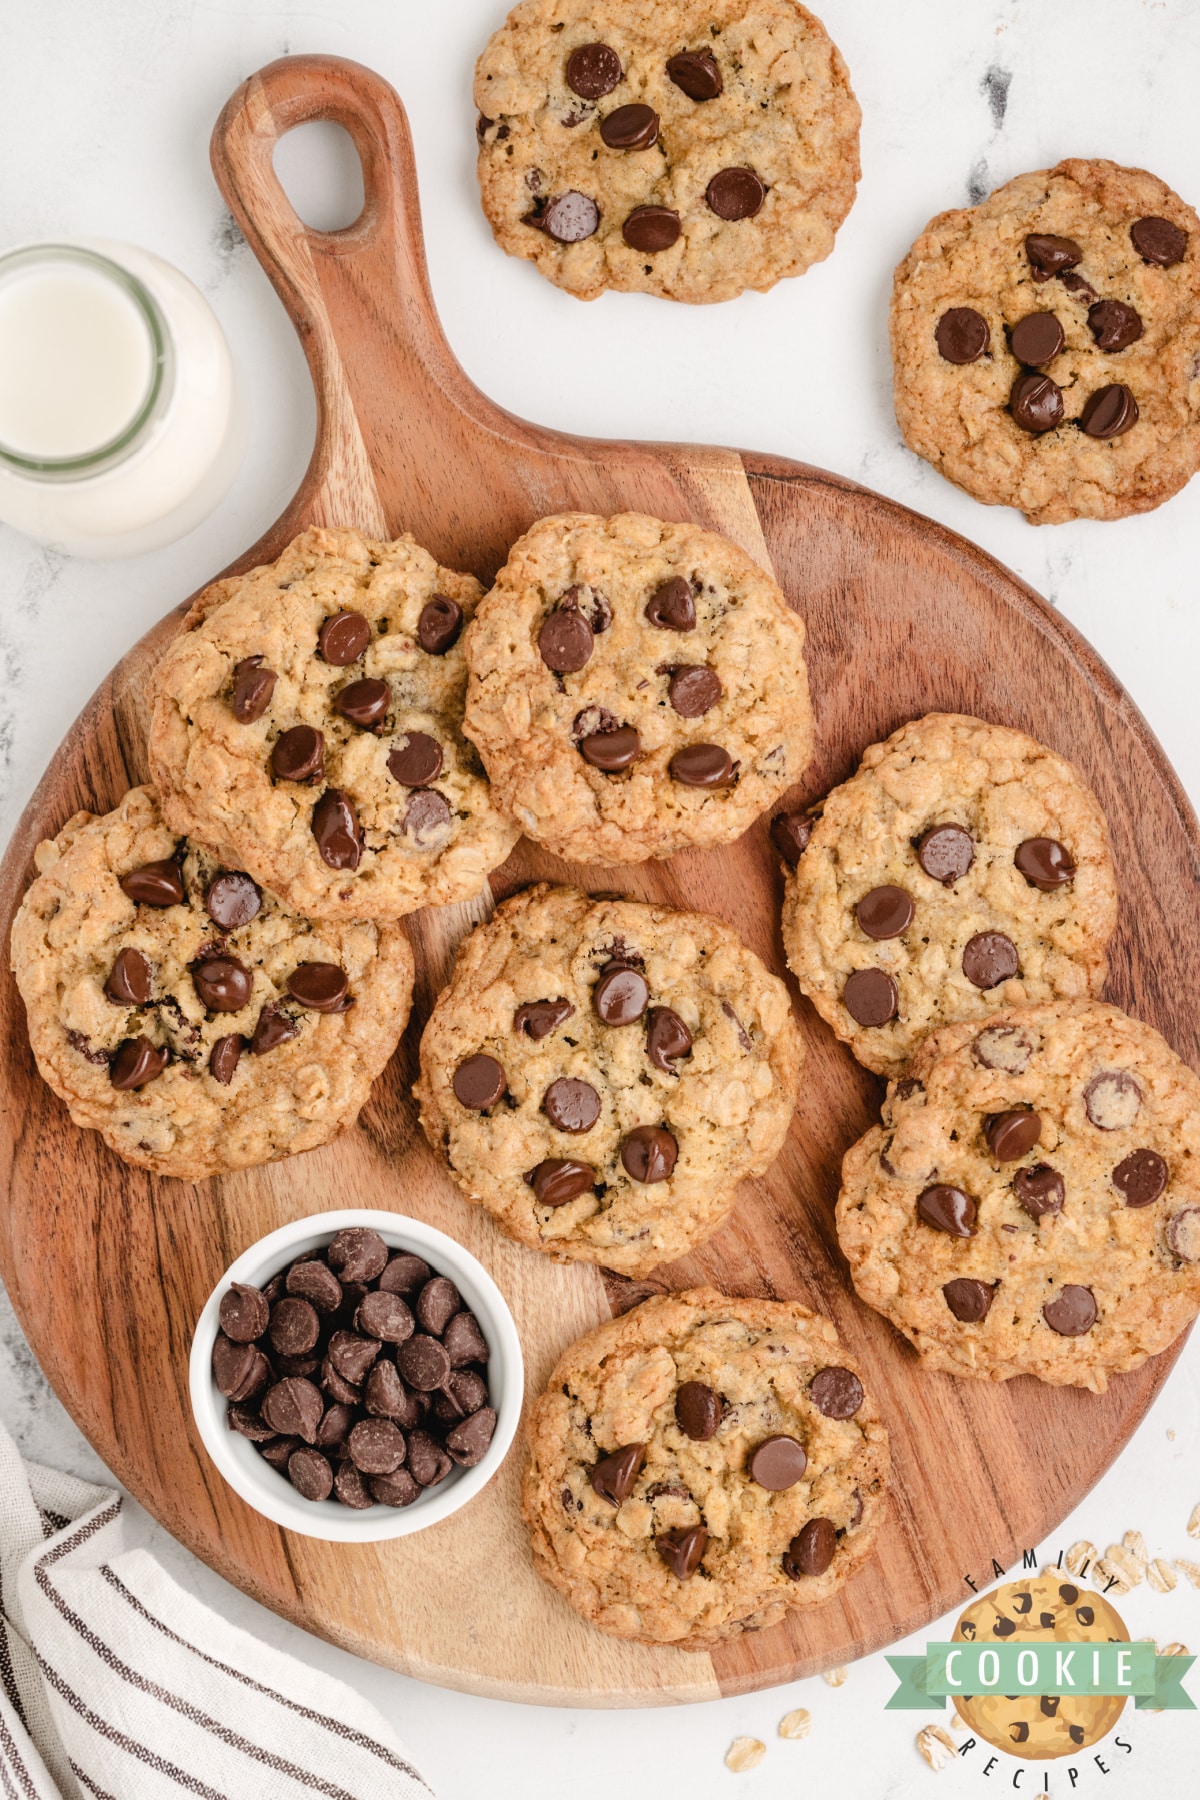 Oatmeal Chocolate Chip Cookies are chewy, delicious, and loaded with oats and chocolate chips. This classic cookie recipe has been a family favorite for many years - it's the best Oatmeal Chocolate Chip Cookie recipe ever!